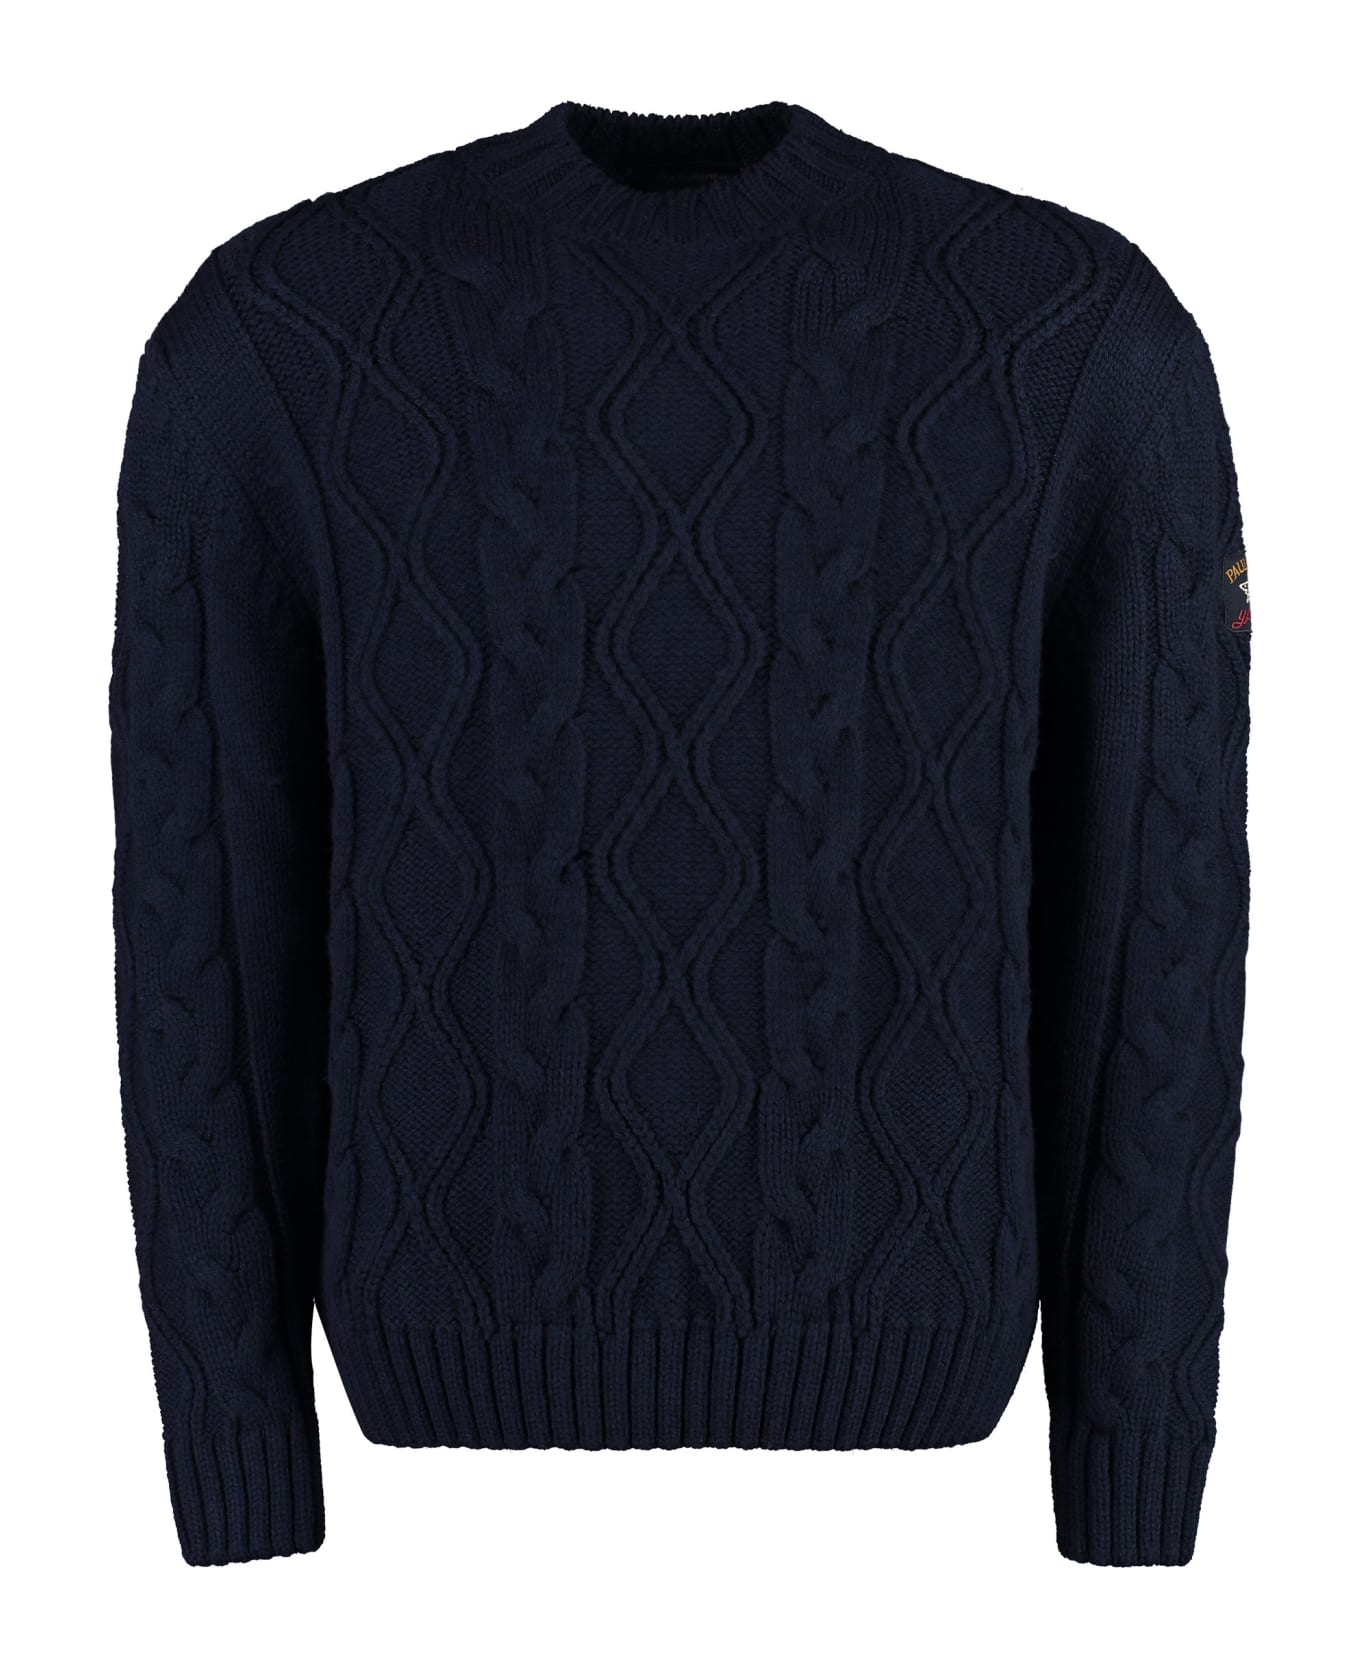 Paul&Shark Cable Knit Sweater - blue